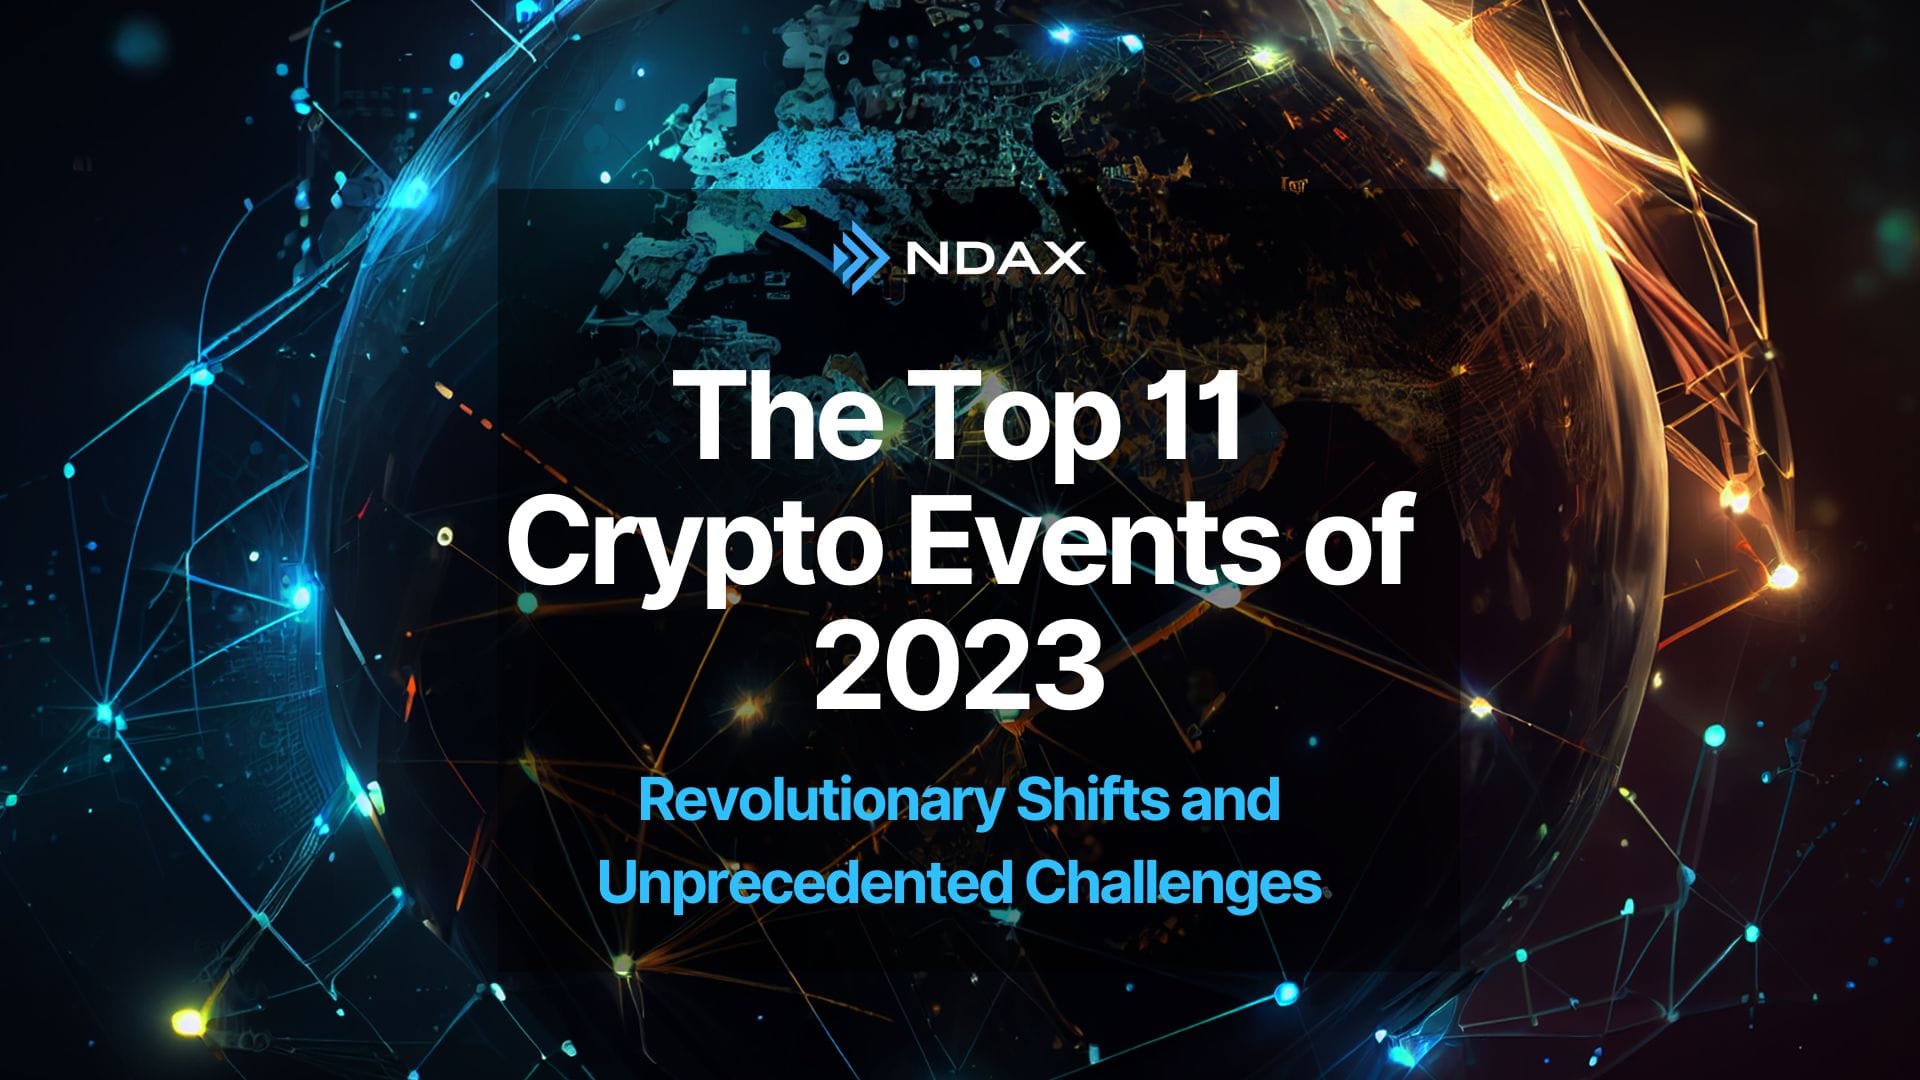 The Top 11 Crypto Events of 2023: Revolutionary Shifts and Unprecedented Challenges